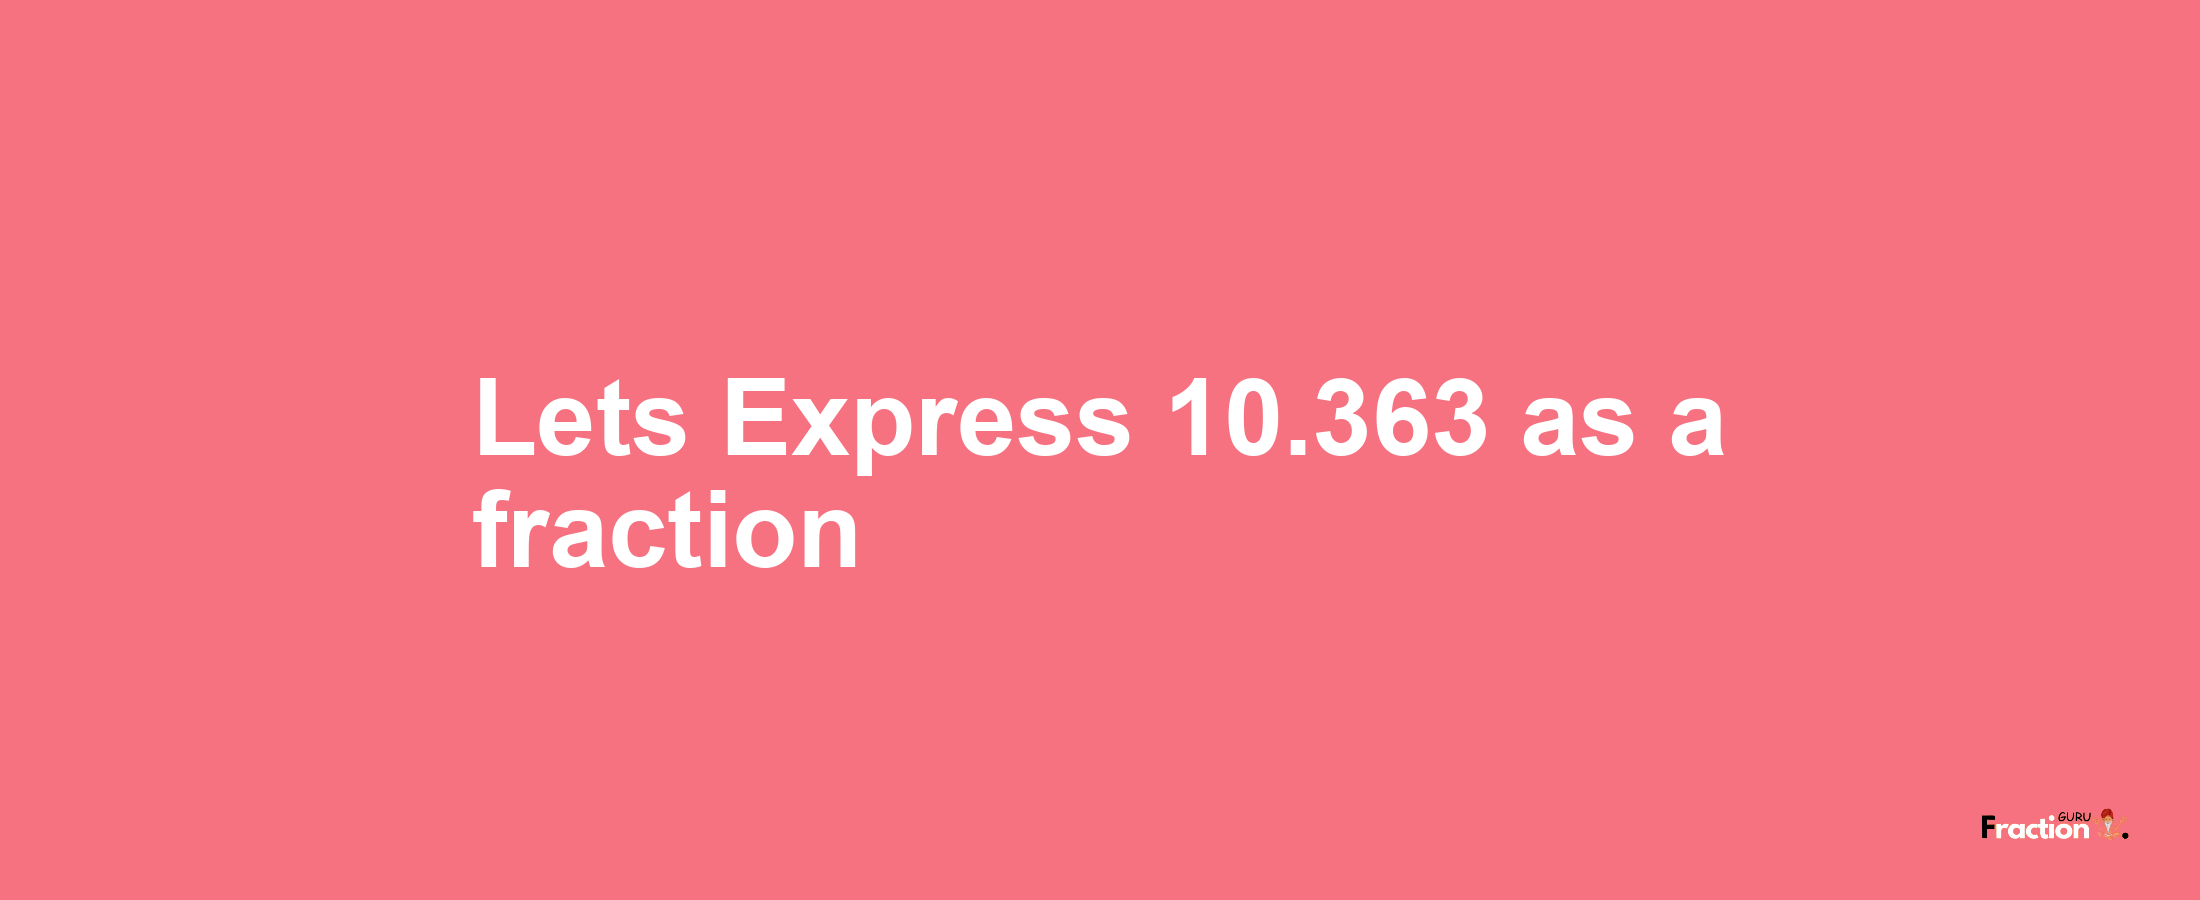 Lets Express 10.363 as afraction